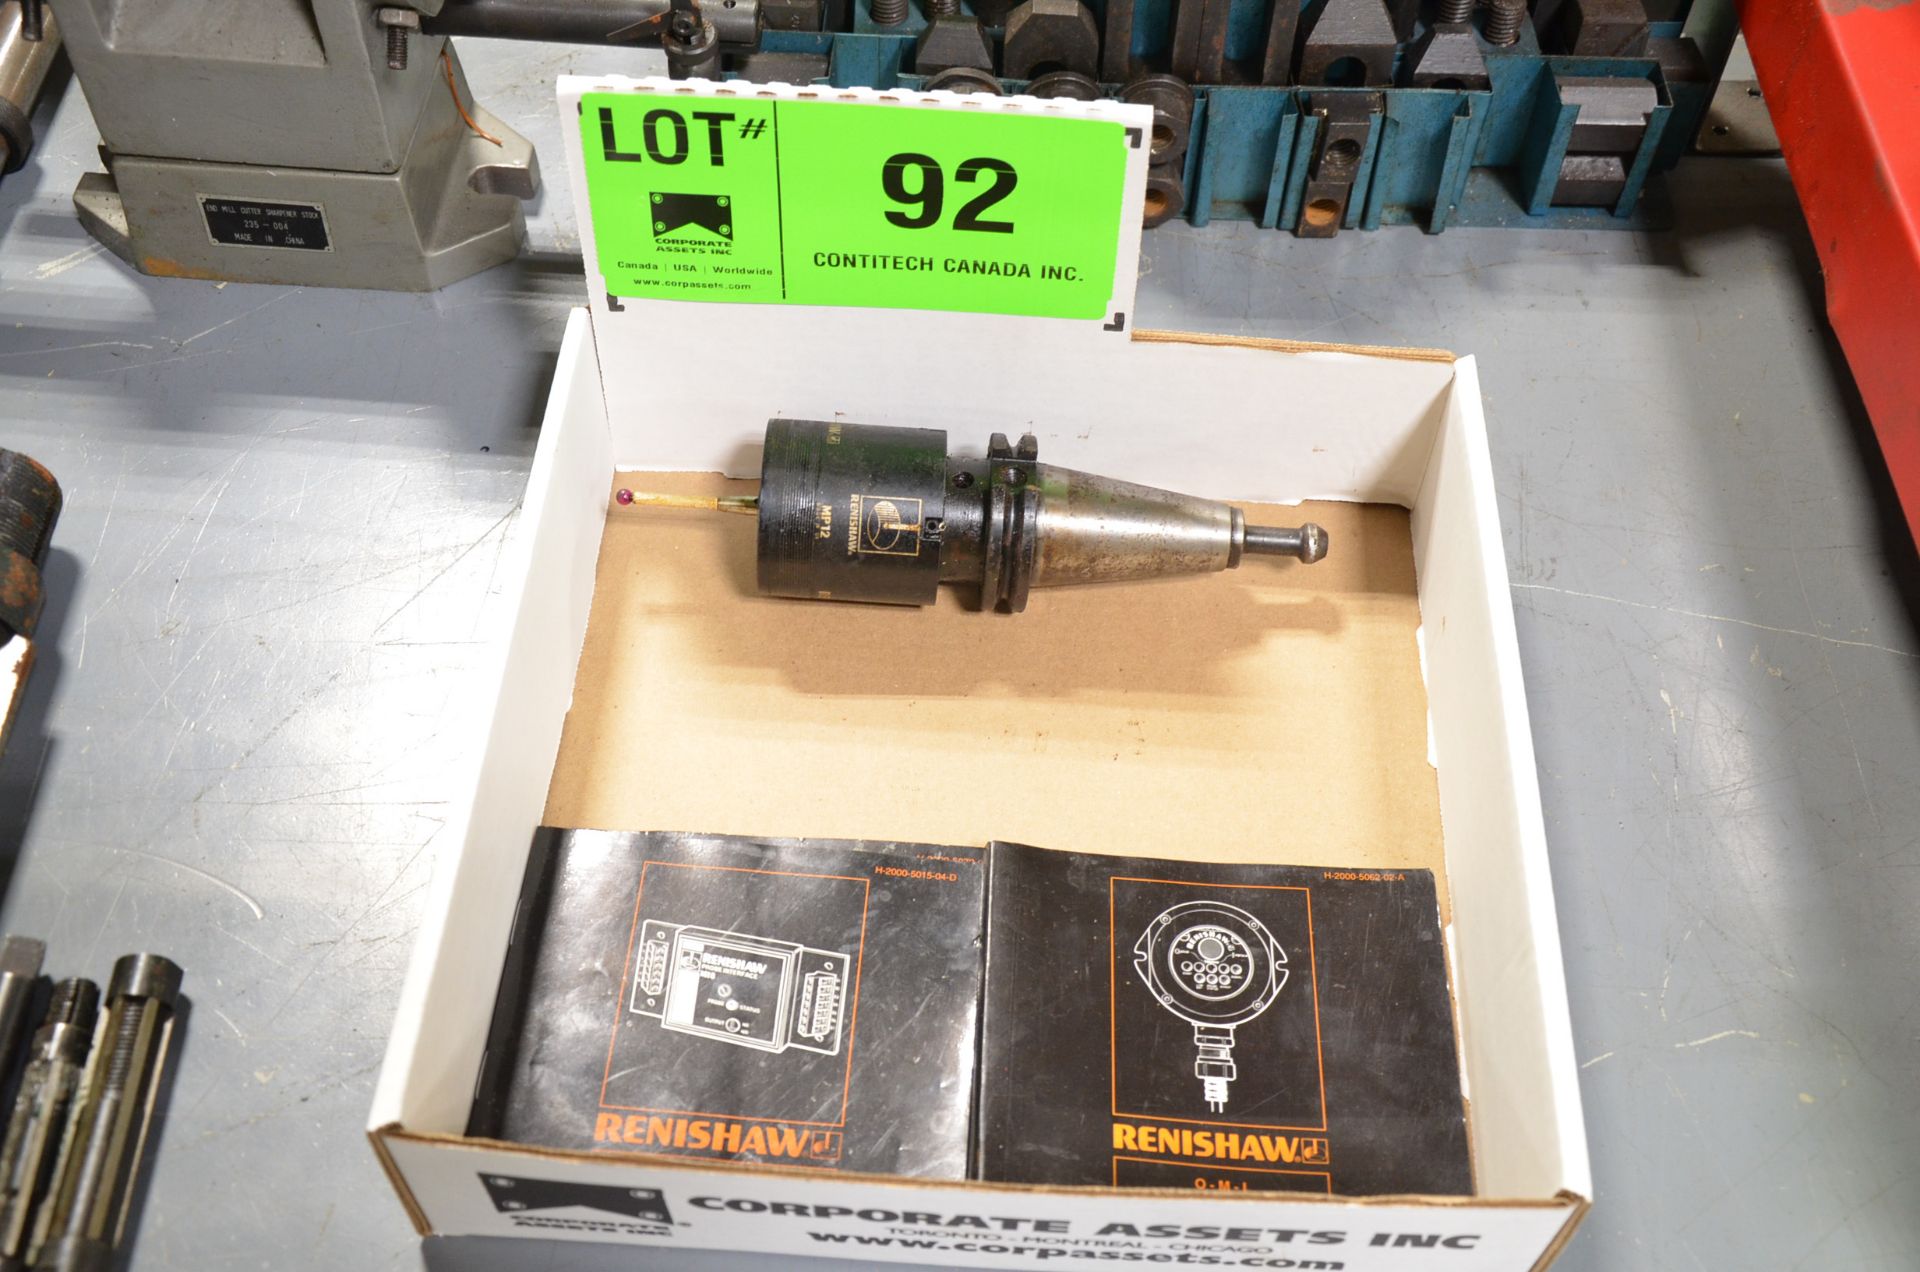 RENISHAW MP12 CAT 40 TOUCH PROBE, S/N N/A [RIGGING FEE FOR LOT #92 - $20 USD PLUS APPLICABLE TAXES]